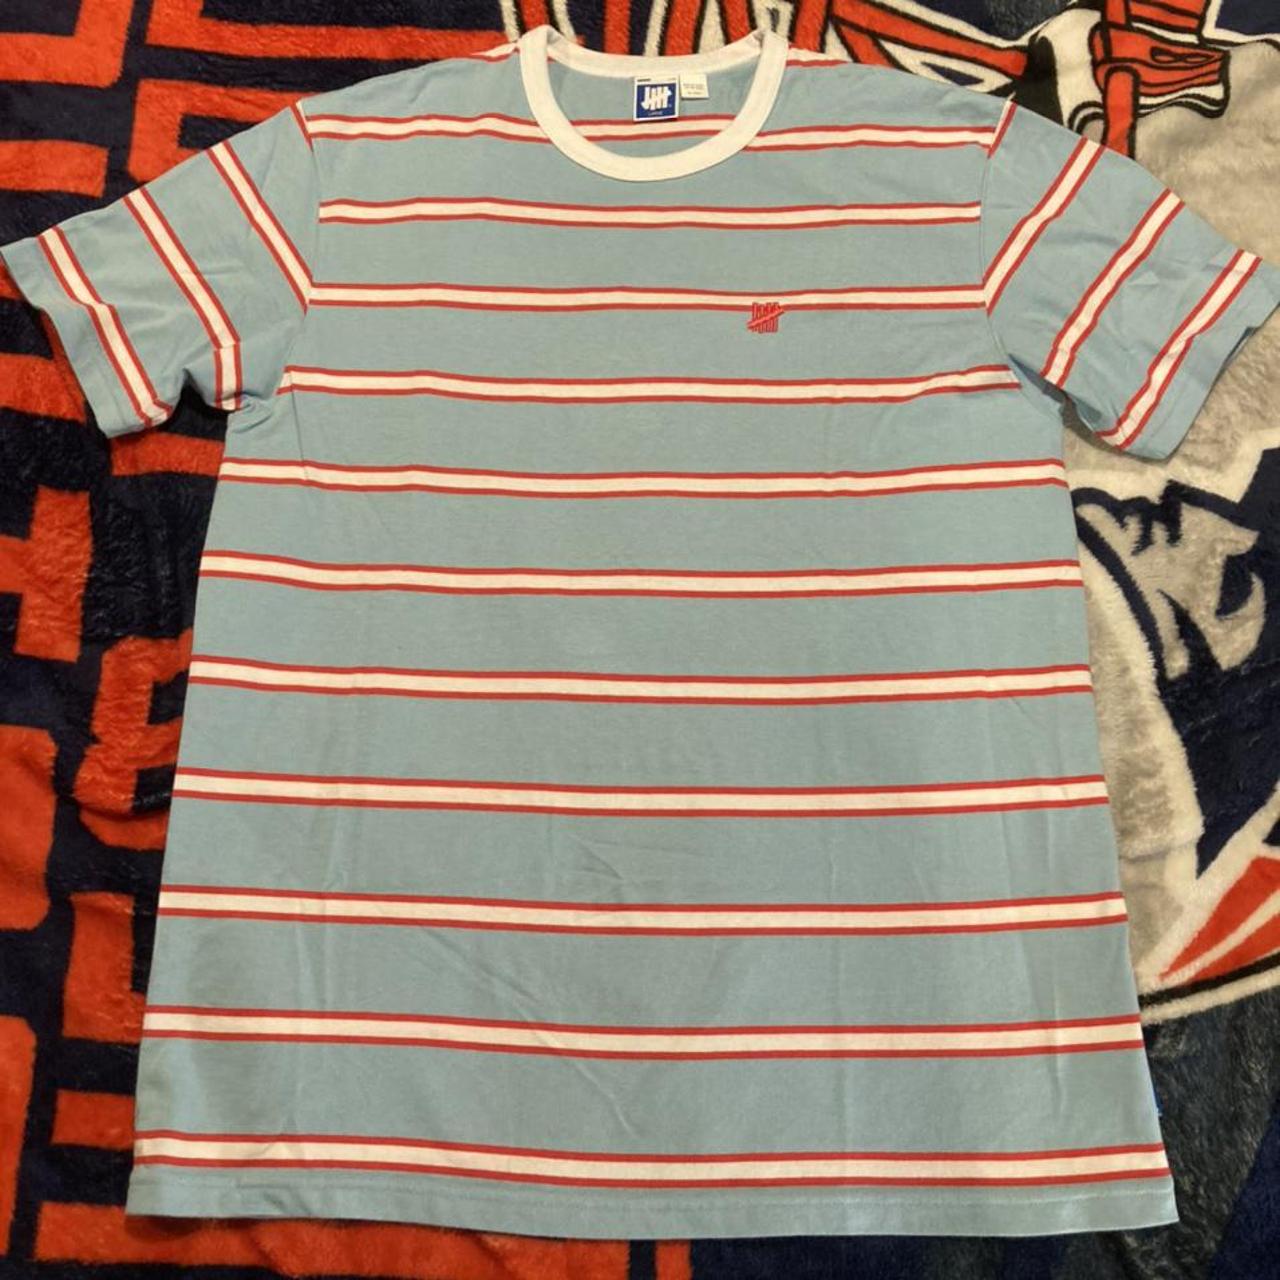 Undefeated Stripe Tee Size Large Next Day Shipping... - Depop